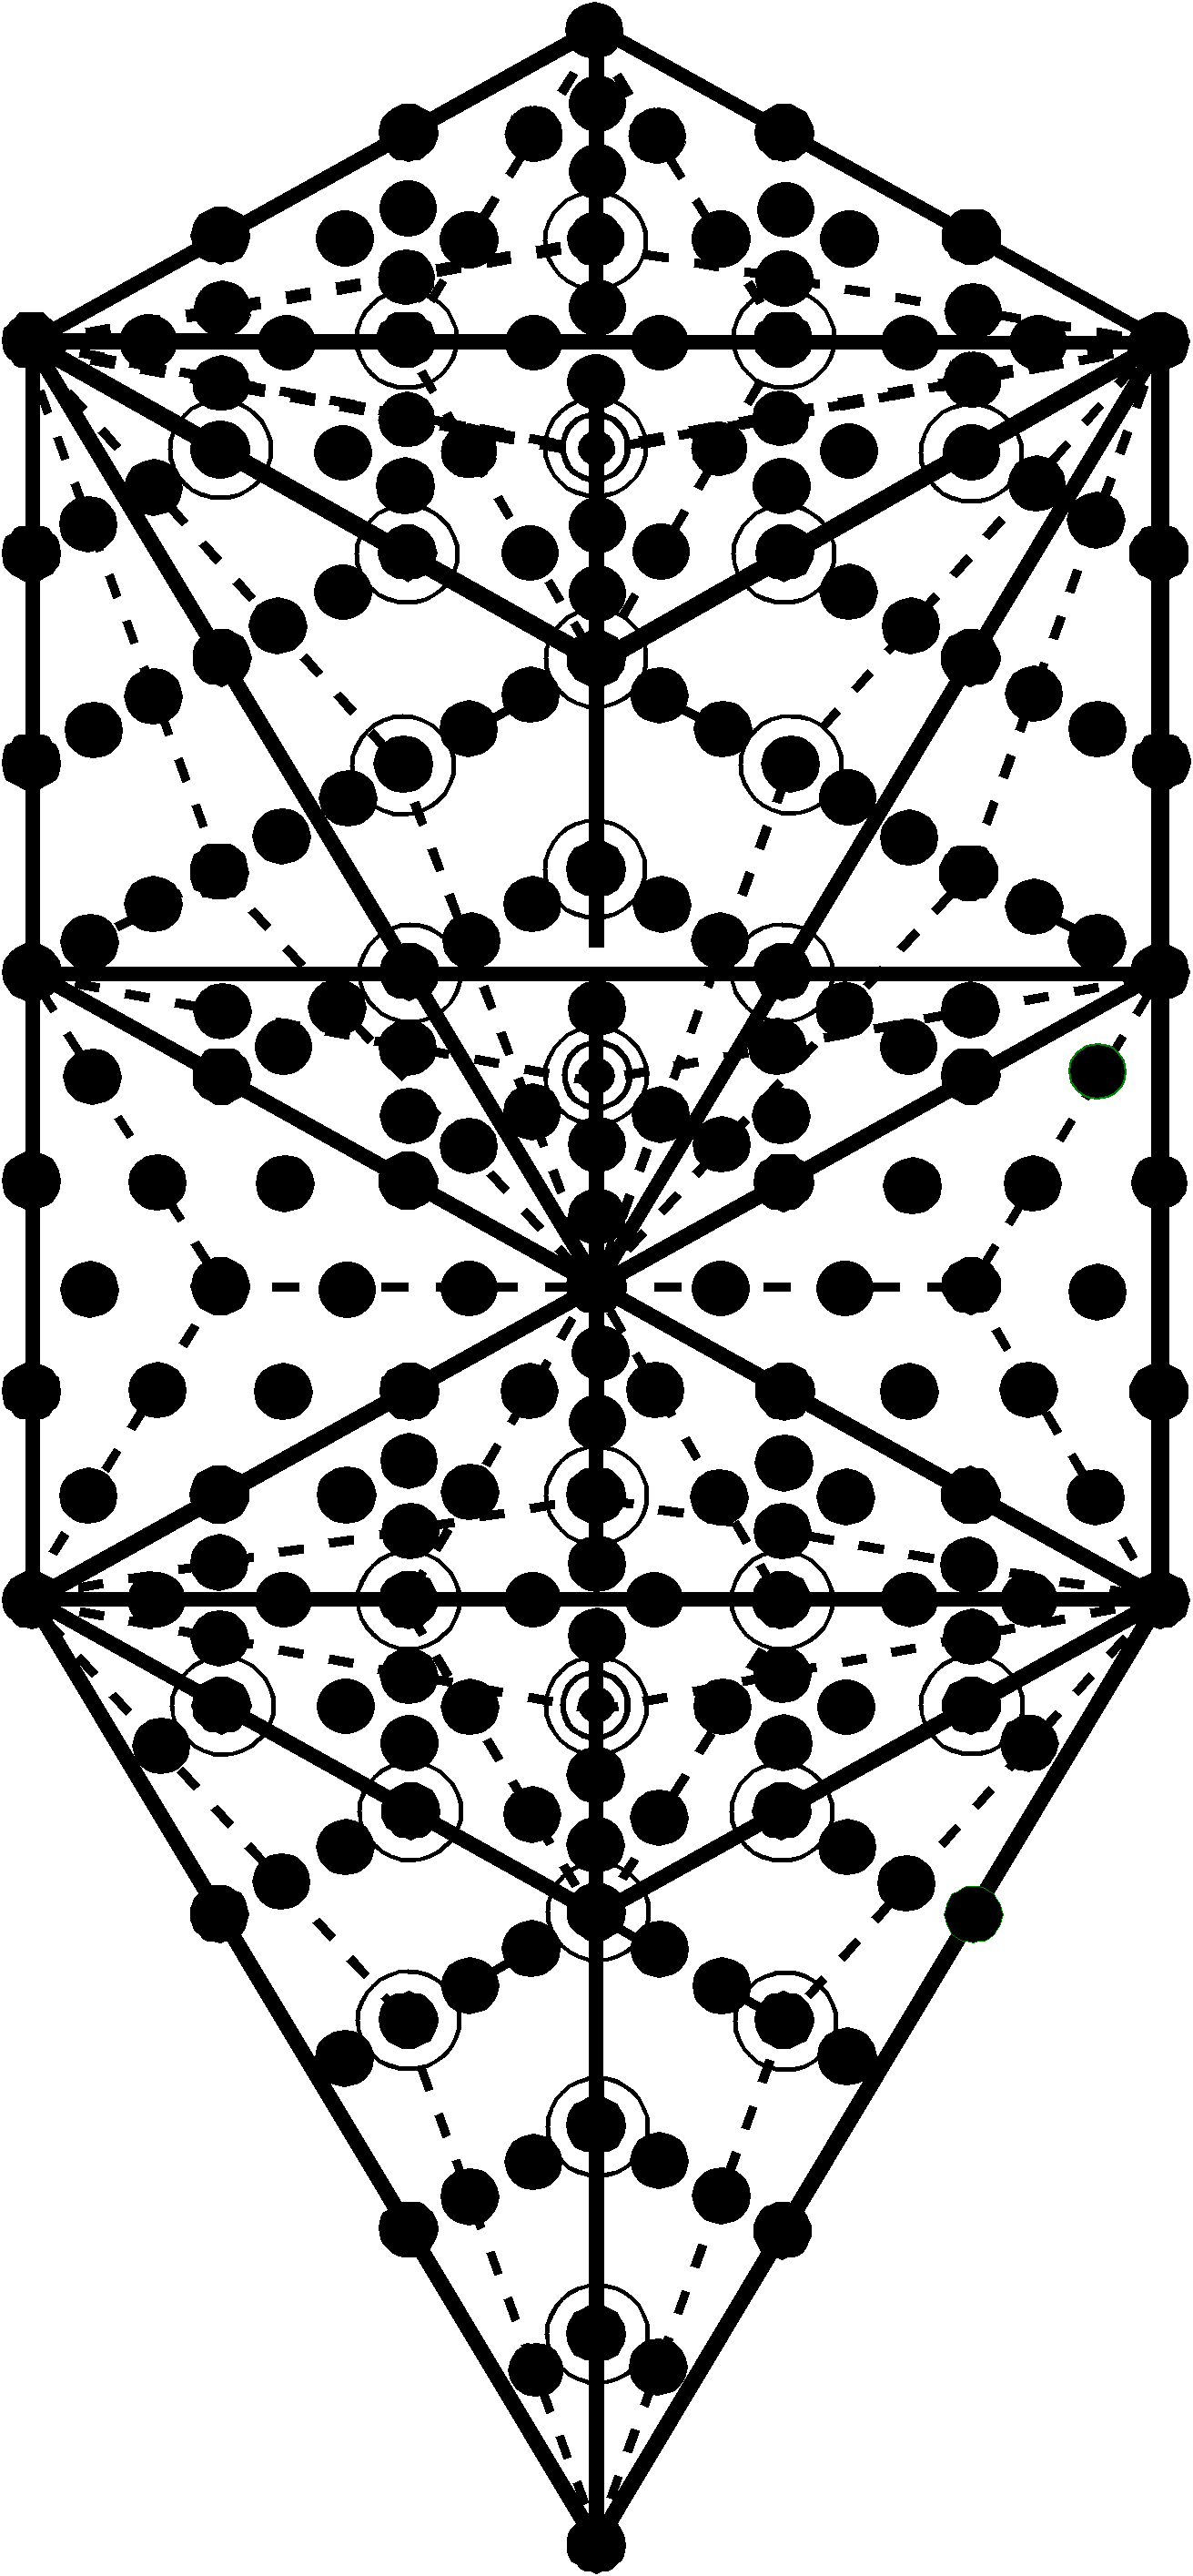 The 1-tree with Type A triangles has 251 yods